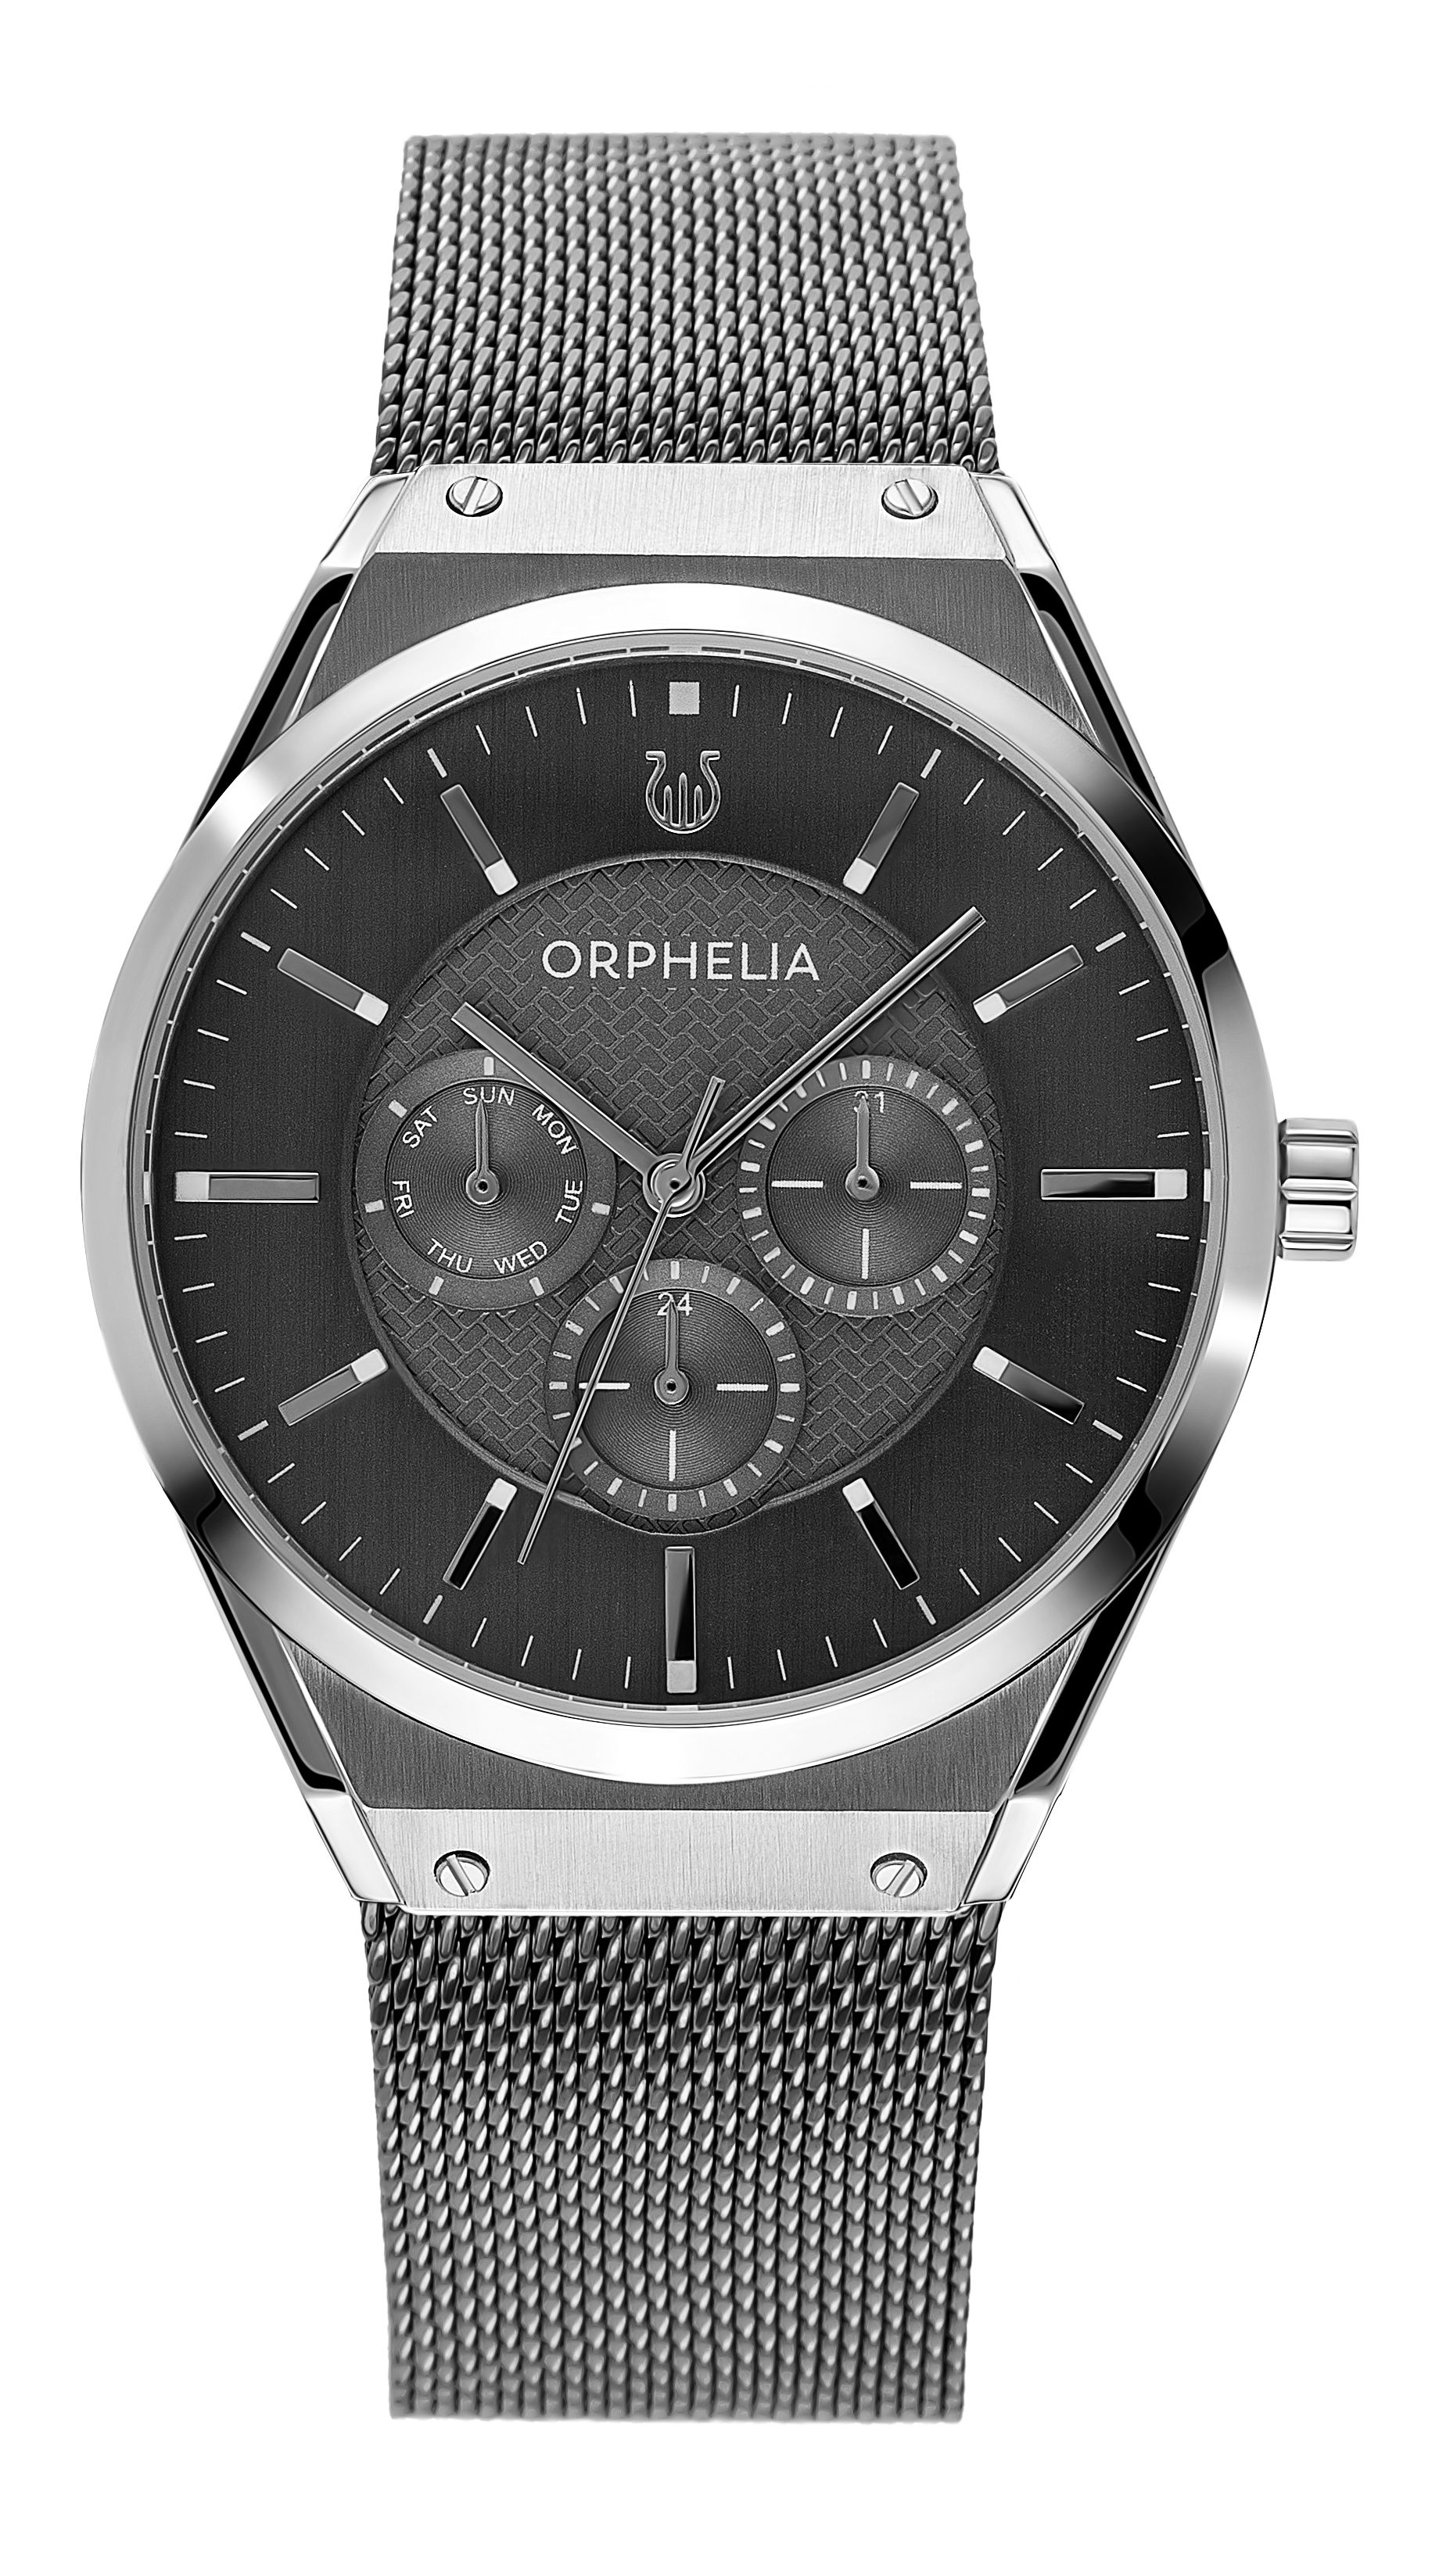 This Orphelia Saffiano Multi Dial Watch for Men is the perfect timepiece to wear or to gift. It's Silver 41 mm Round case combined with the comfortable Grey Stainless steel watch band will ensure you enjoy this stunning timepiece without any compromise. Operated by a high quality Quartz movement and water resistant to 3 bars, your watch will keep ticking. GREAT DESIGN: ORPHELIA Saffiano Multi dial  watch with a Miyota Quartz movement includes a date display and has a mesh band. This watch features a 24 hour display. Perfect for parties, date nights and wearing in the office. PREMIUM QUALITY: By using high-quality materials  Glass: Mineral Glass  Case material: Stainless steel  Bracelet material: Stainless steel- Water resistant: 3 bars COMPACT SIZE: Case diameter: 41 mm  Height: 9 mm  Strap- Length: 22 cm  Width: 20 mm. Due to this practical handy size  the watch is absolutely for everyday use-Weight: 92 g